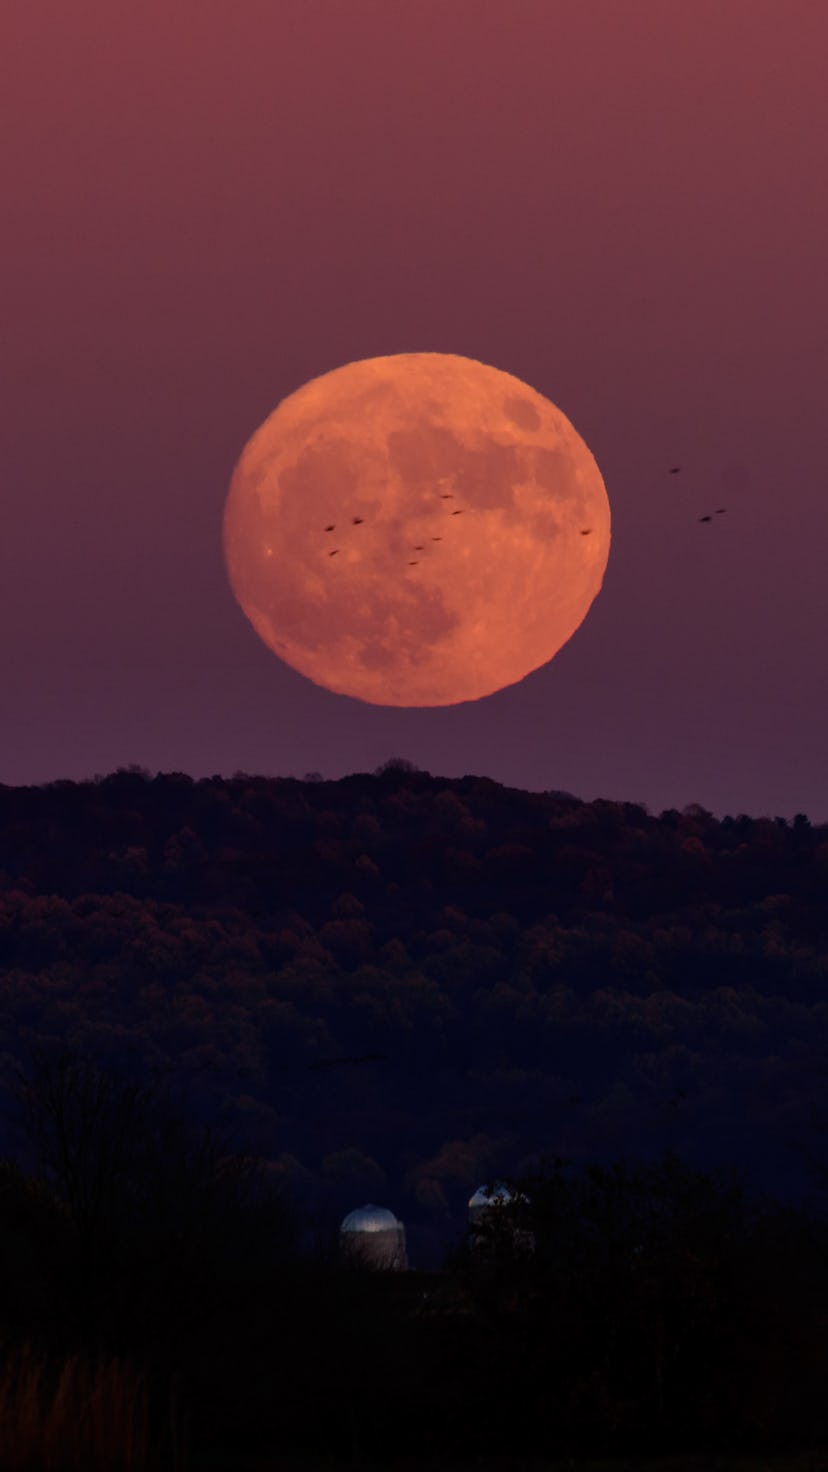 A supermoon happens when the full moon coincides with the moon's closest approach to Earth in its or...